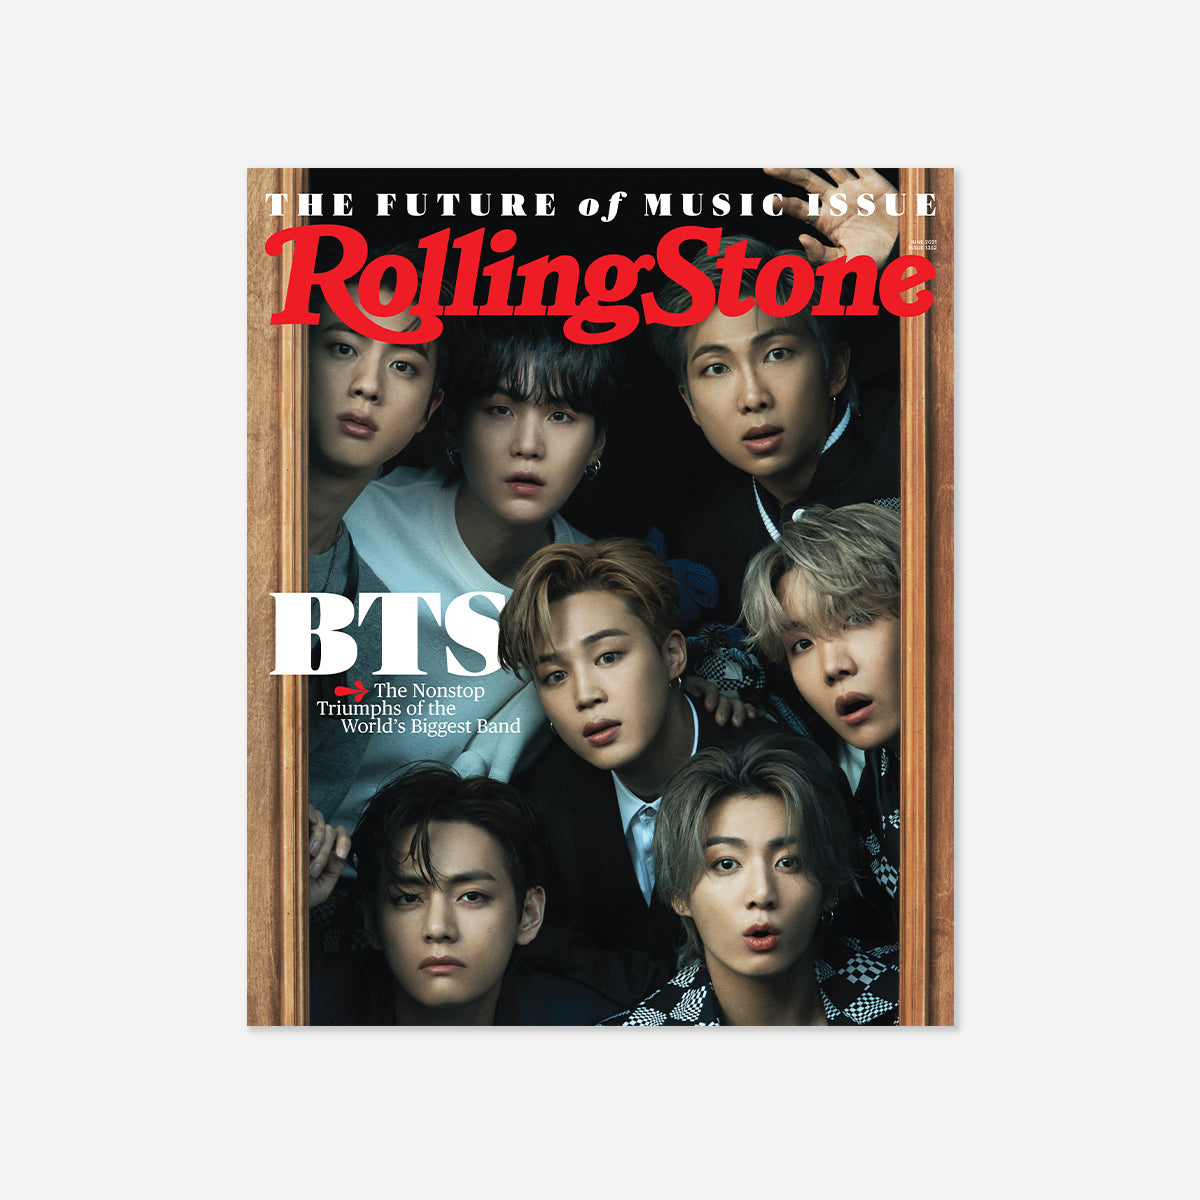 Rolling Stone Magazine June 2021 Featuring BTS (Issue 1352)